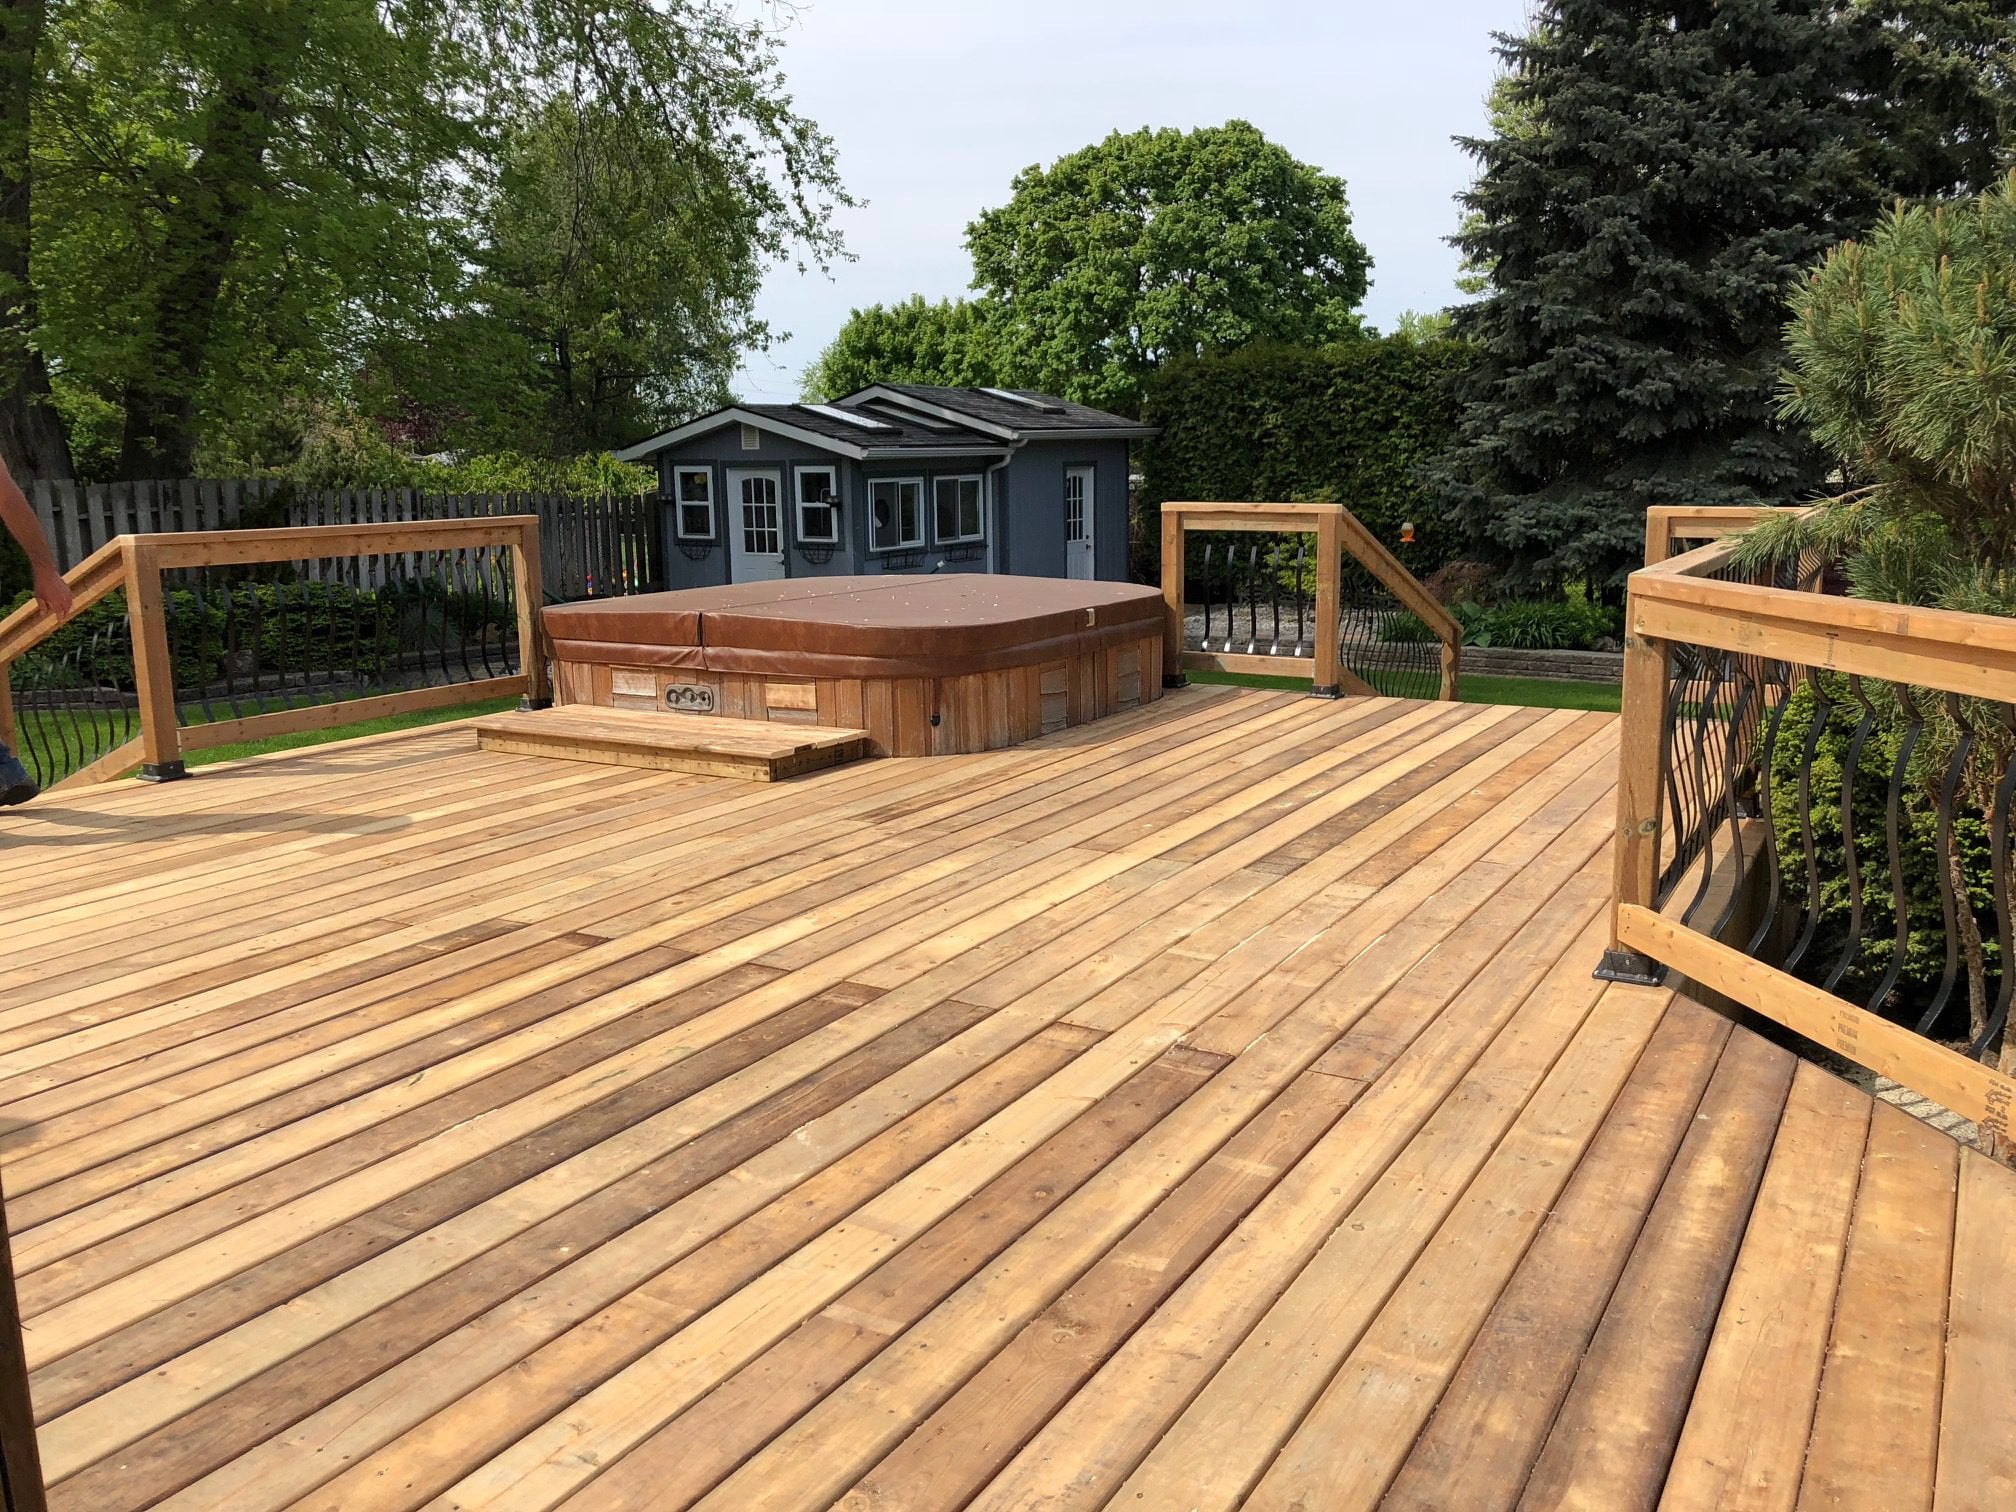 Deck Resurfacing With New Boards and Existing Deck